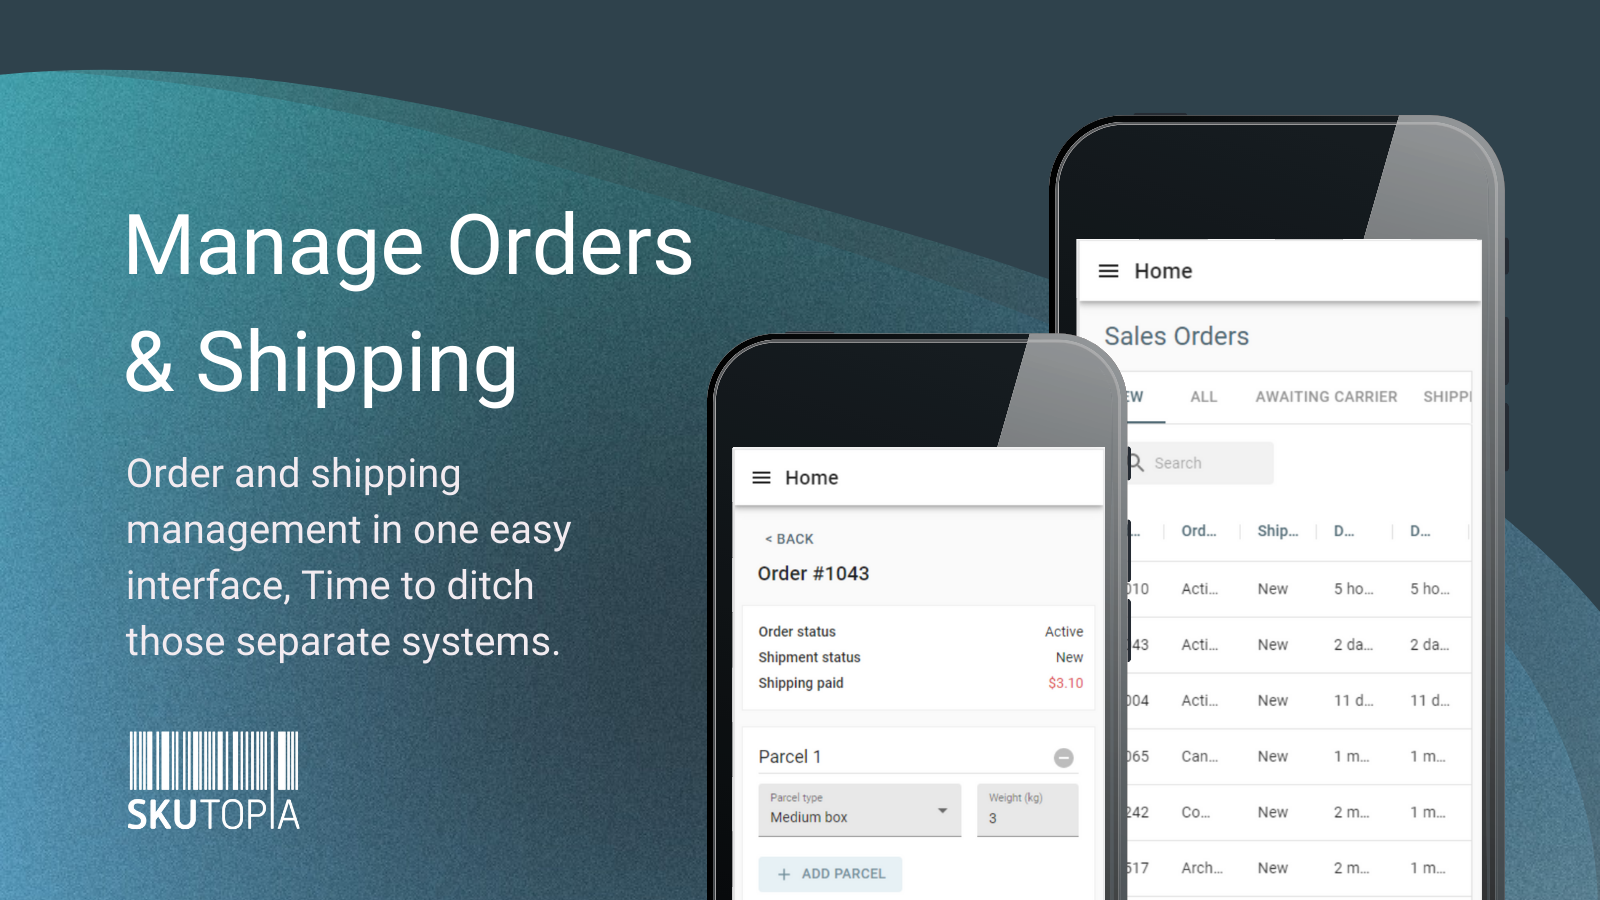 Manage orders & shipping